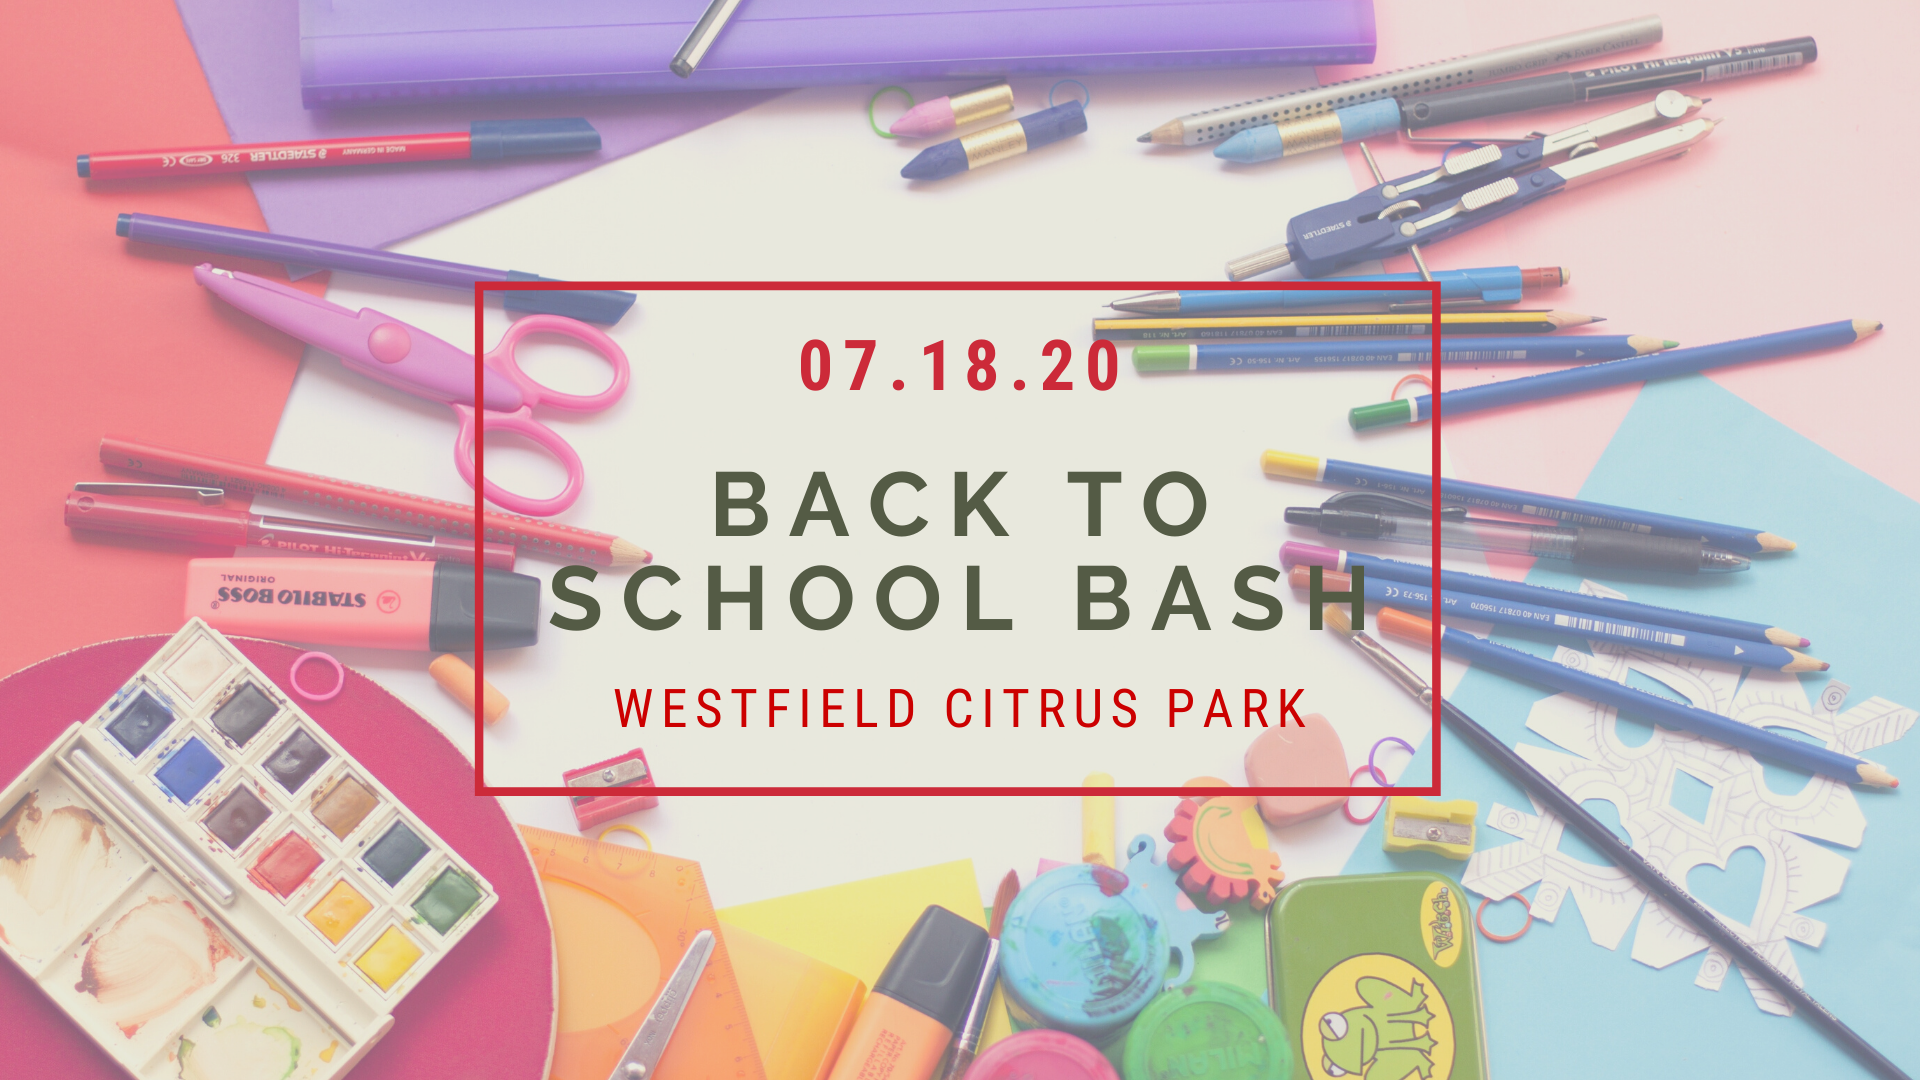 Full Inclusion Back to School Bash presented by Westfield Citrus Park